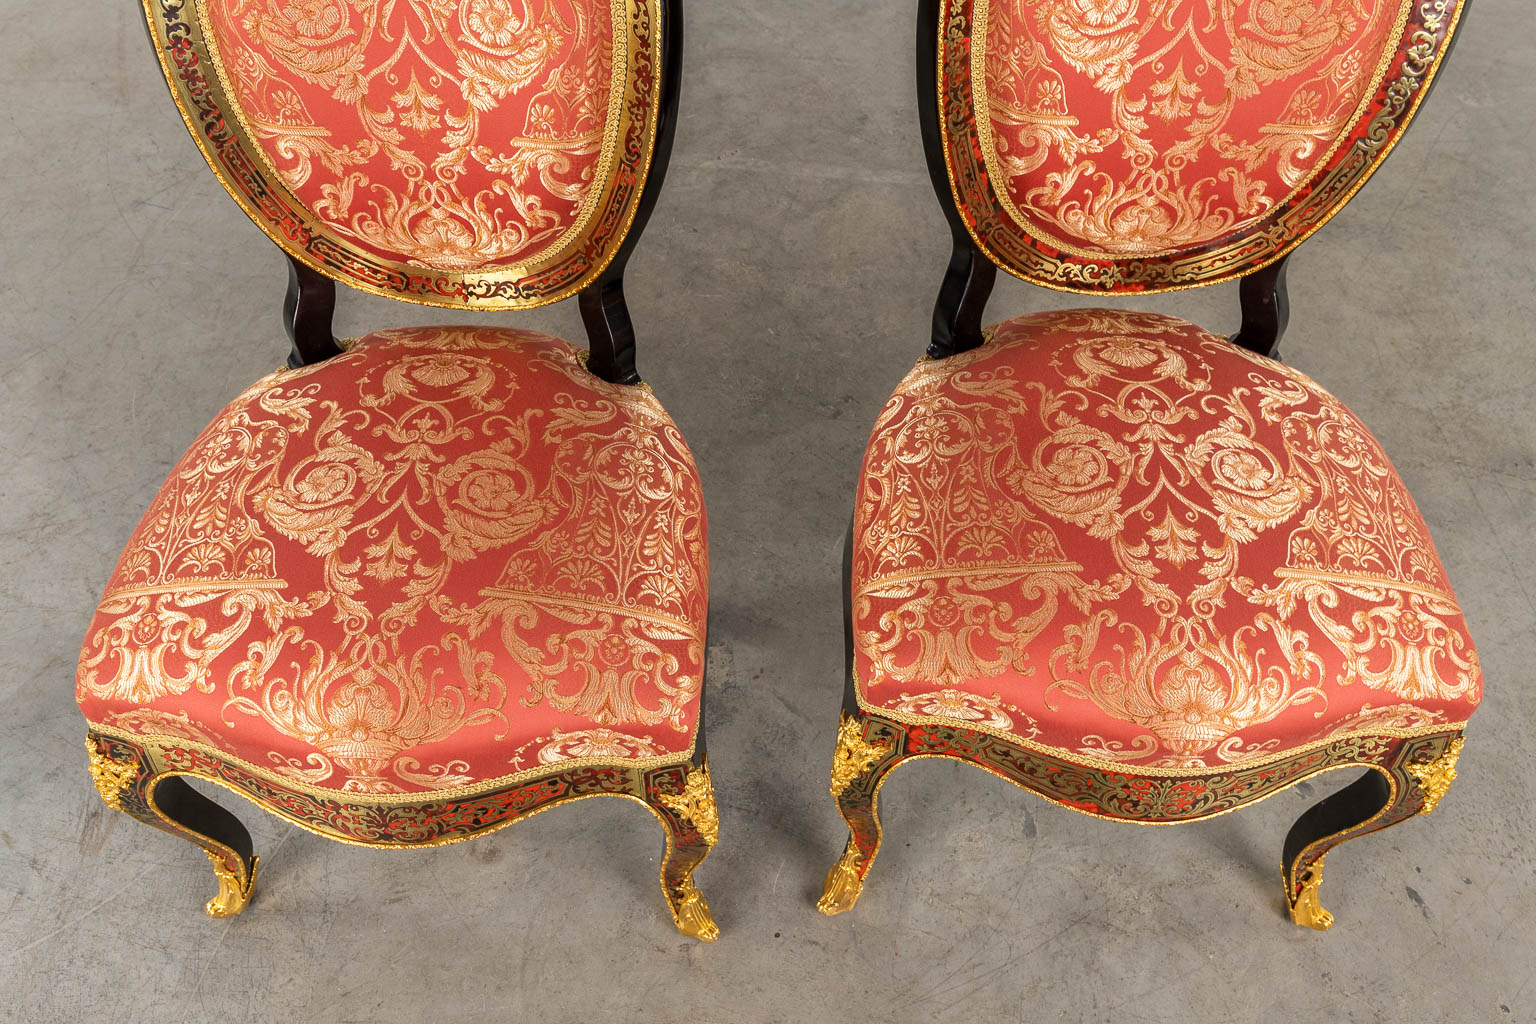 A pair of Chairs, Boulle technique, tortoise shell and copper inlay, Napoleon 3, 19th C. (D:56 x W:50 x H:97 cm)